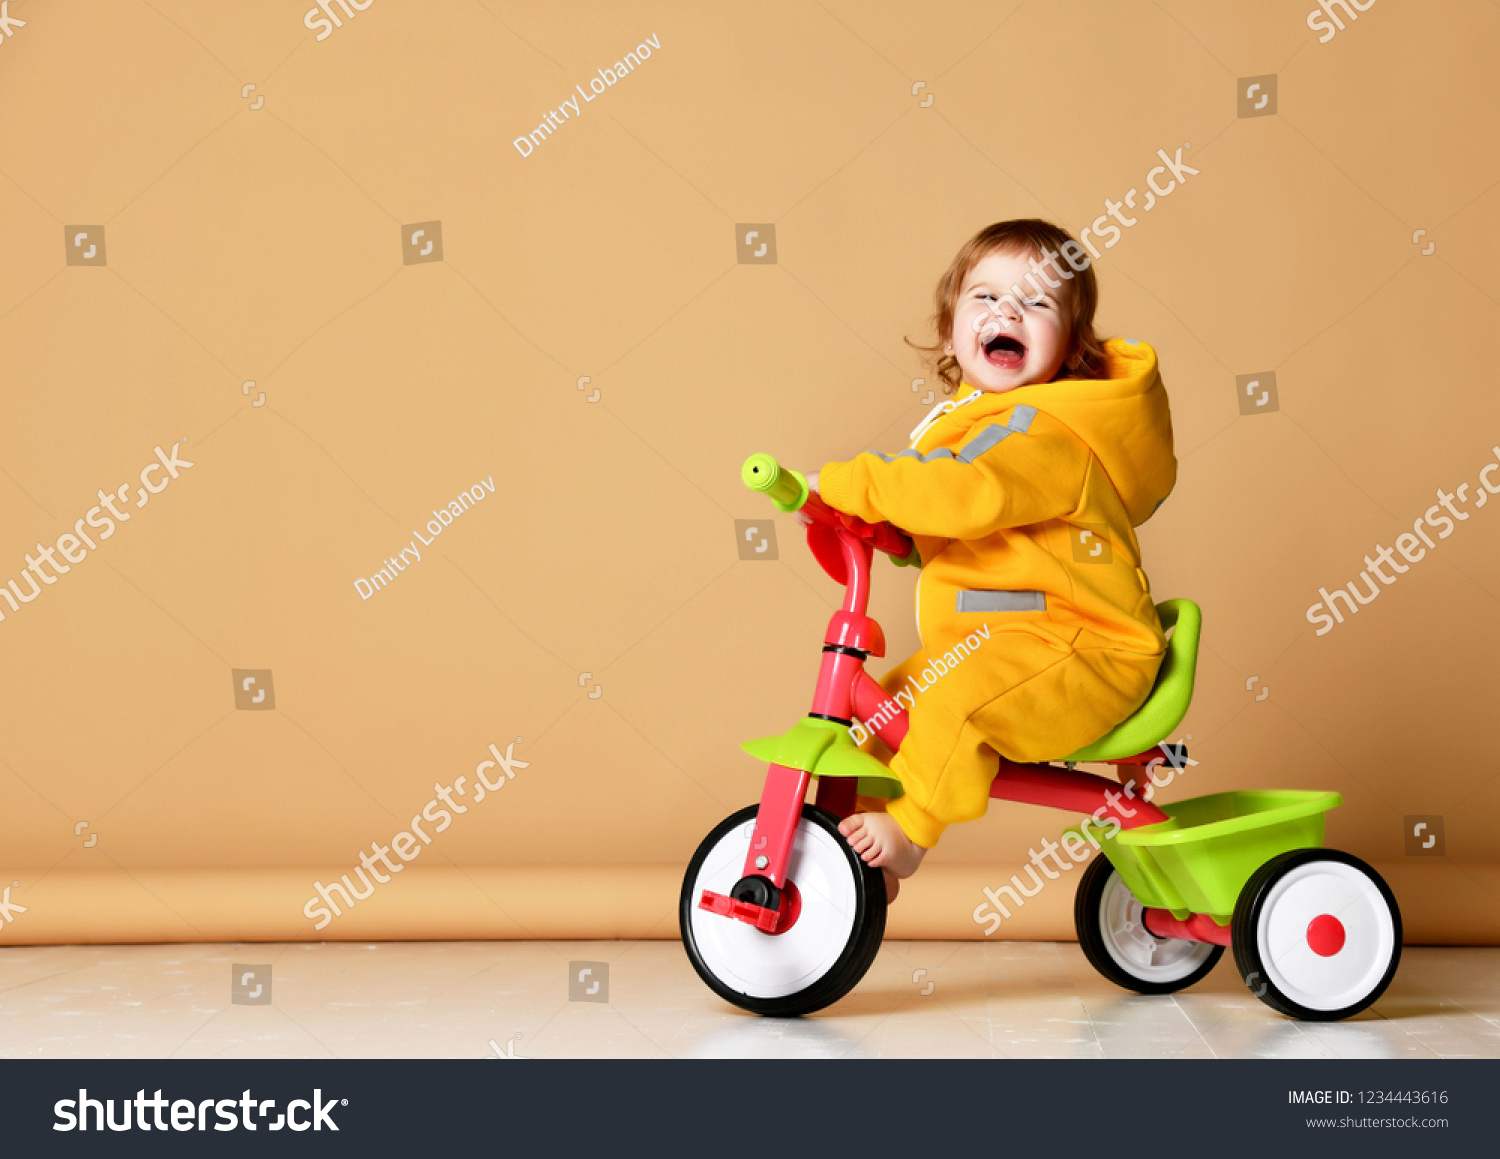 Baby girl kid riding her first bicycle tricycle in warm yellow overalls looking up on screaming grey background #1234443616